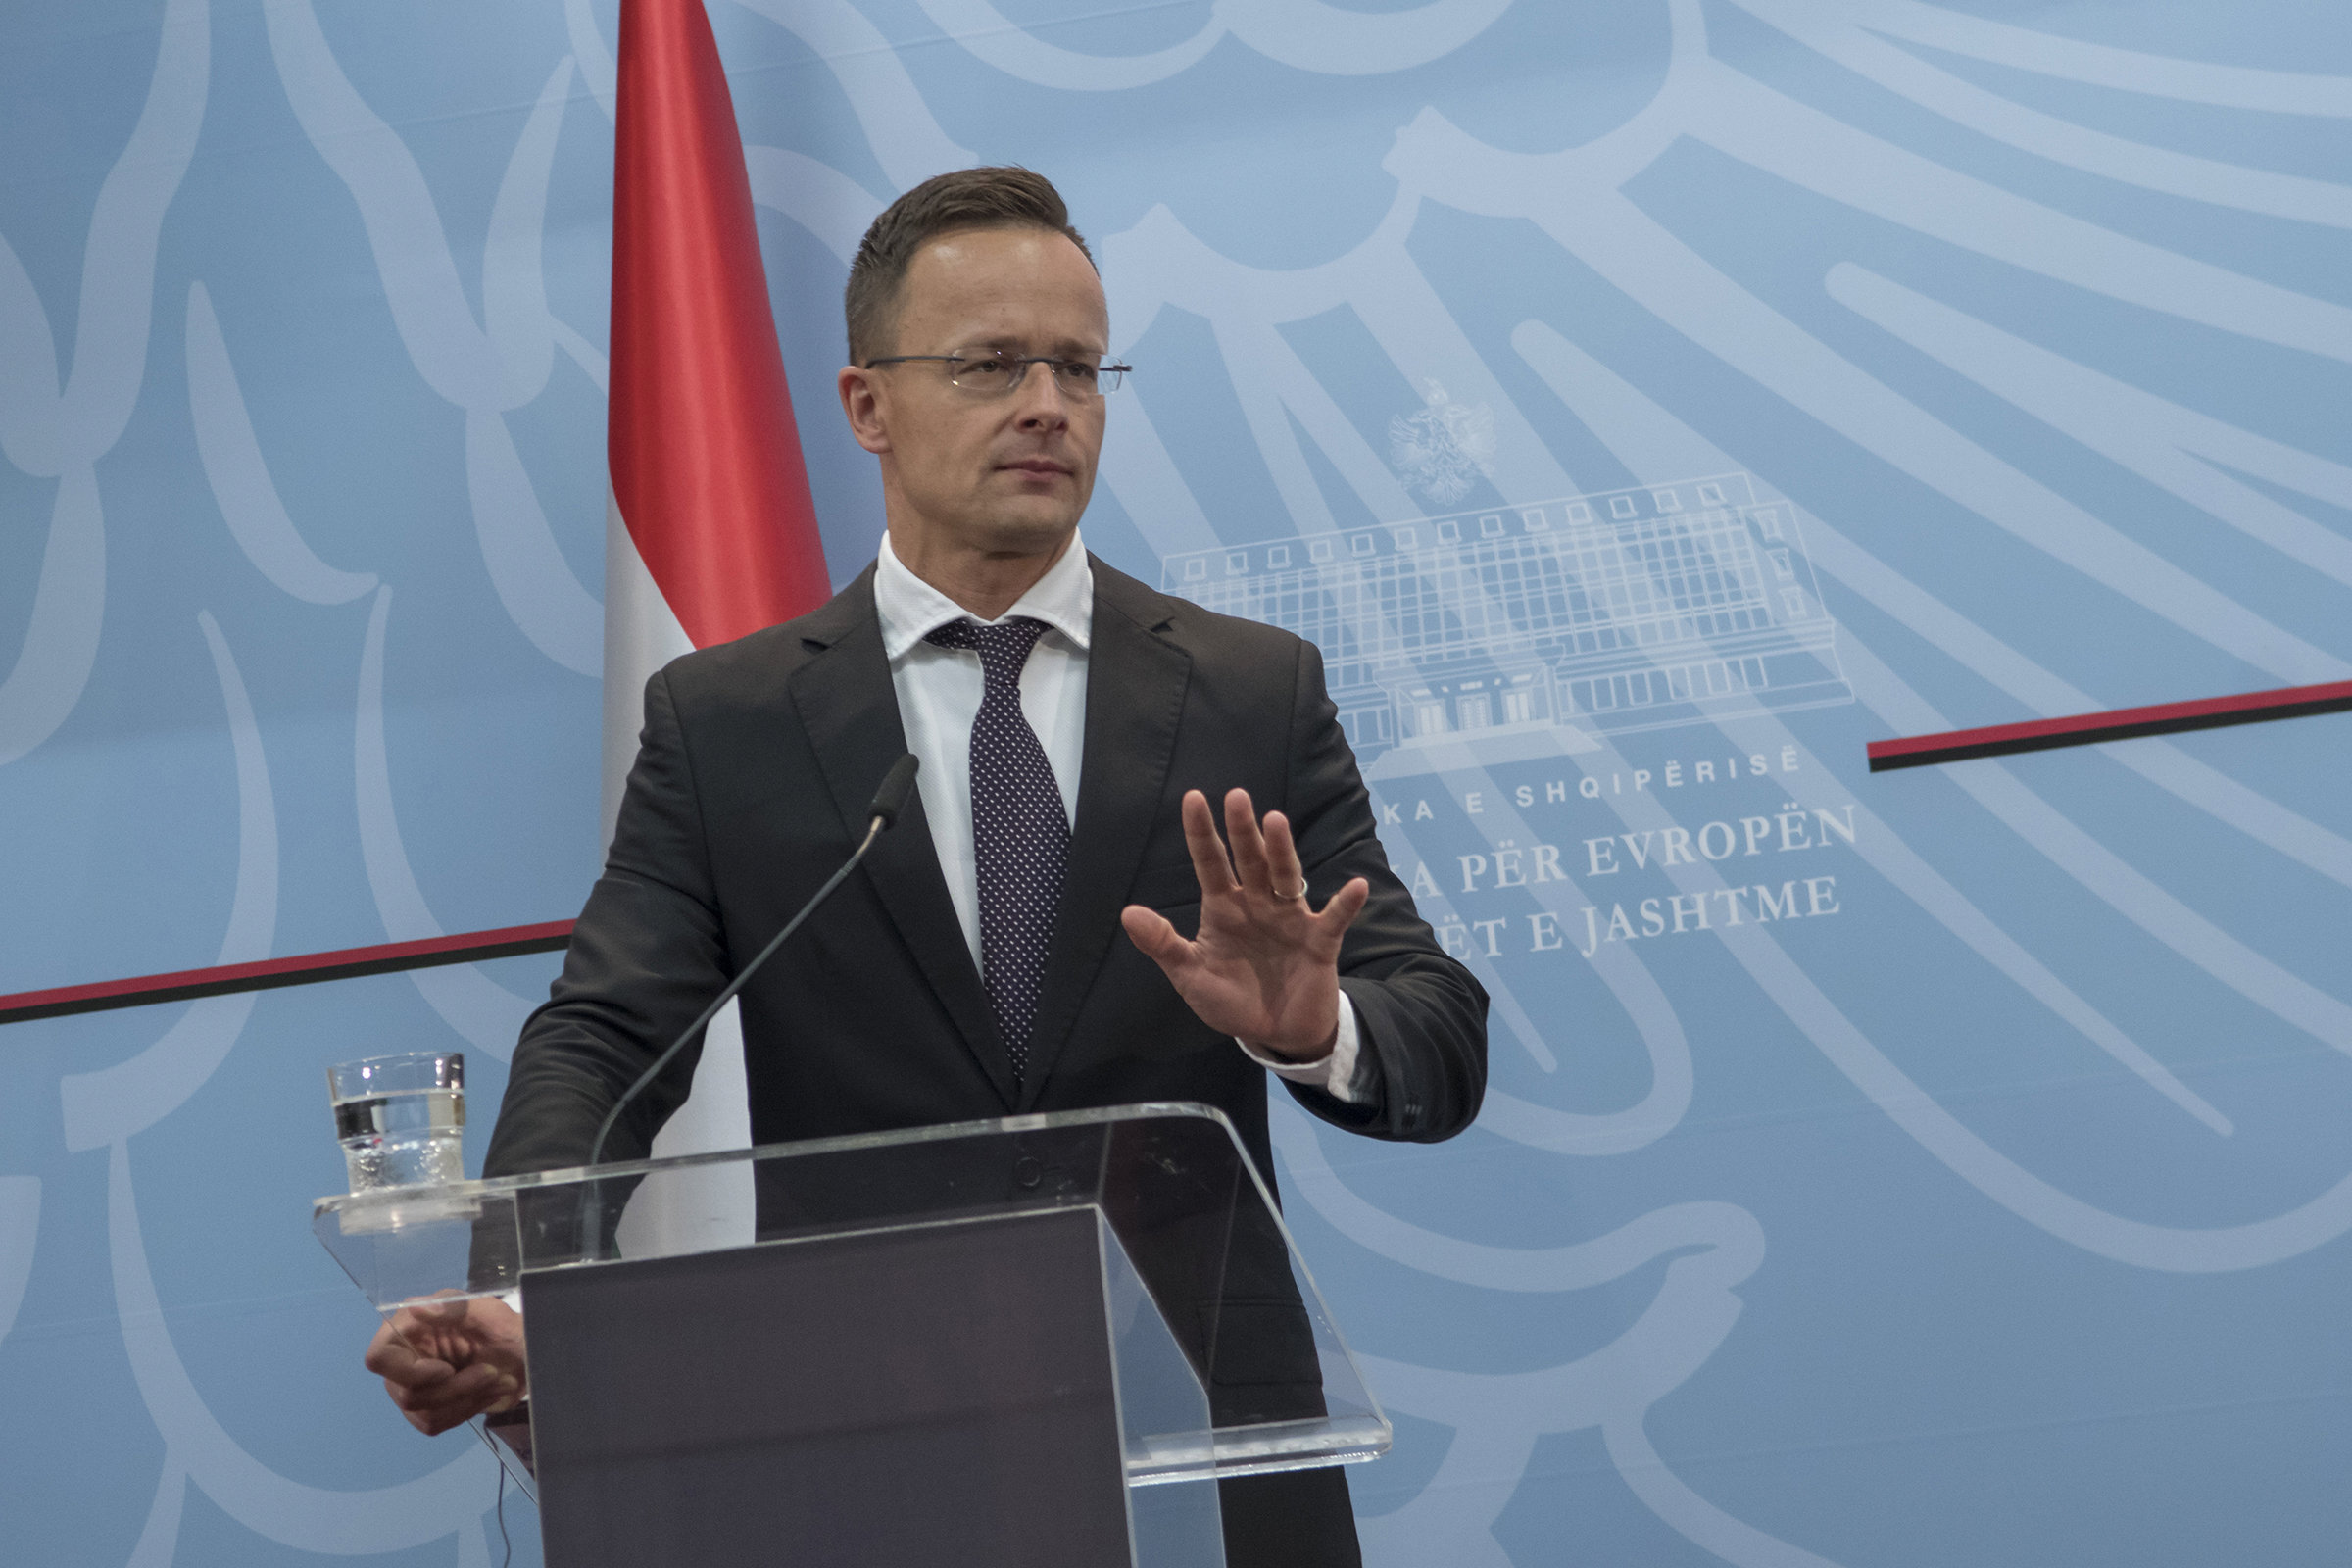 Foreign Minister On Hungarian-Romanian Relations